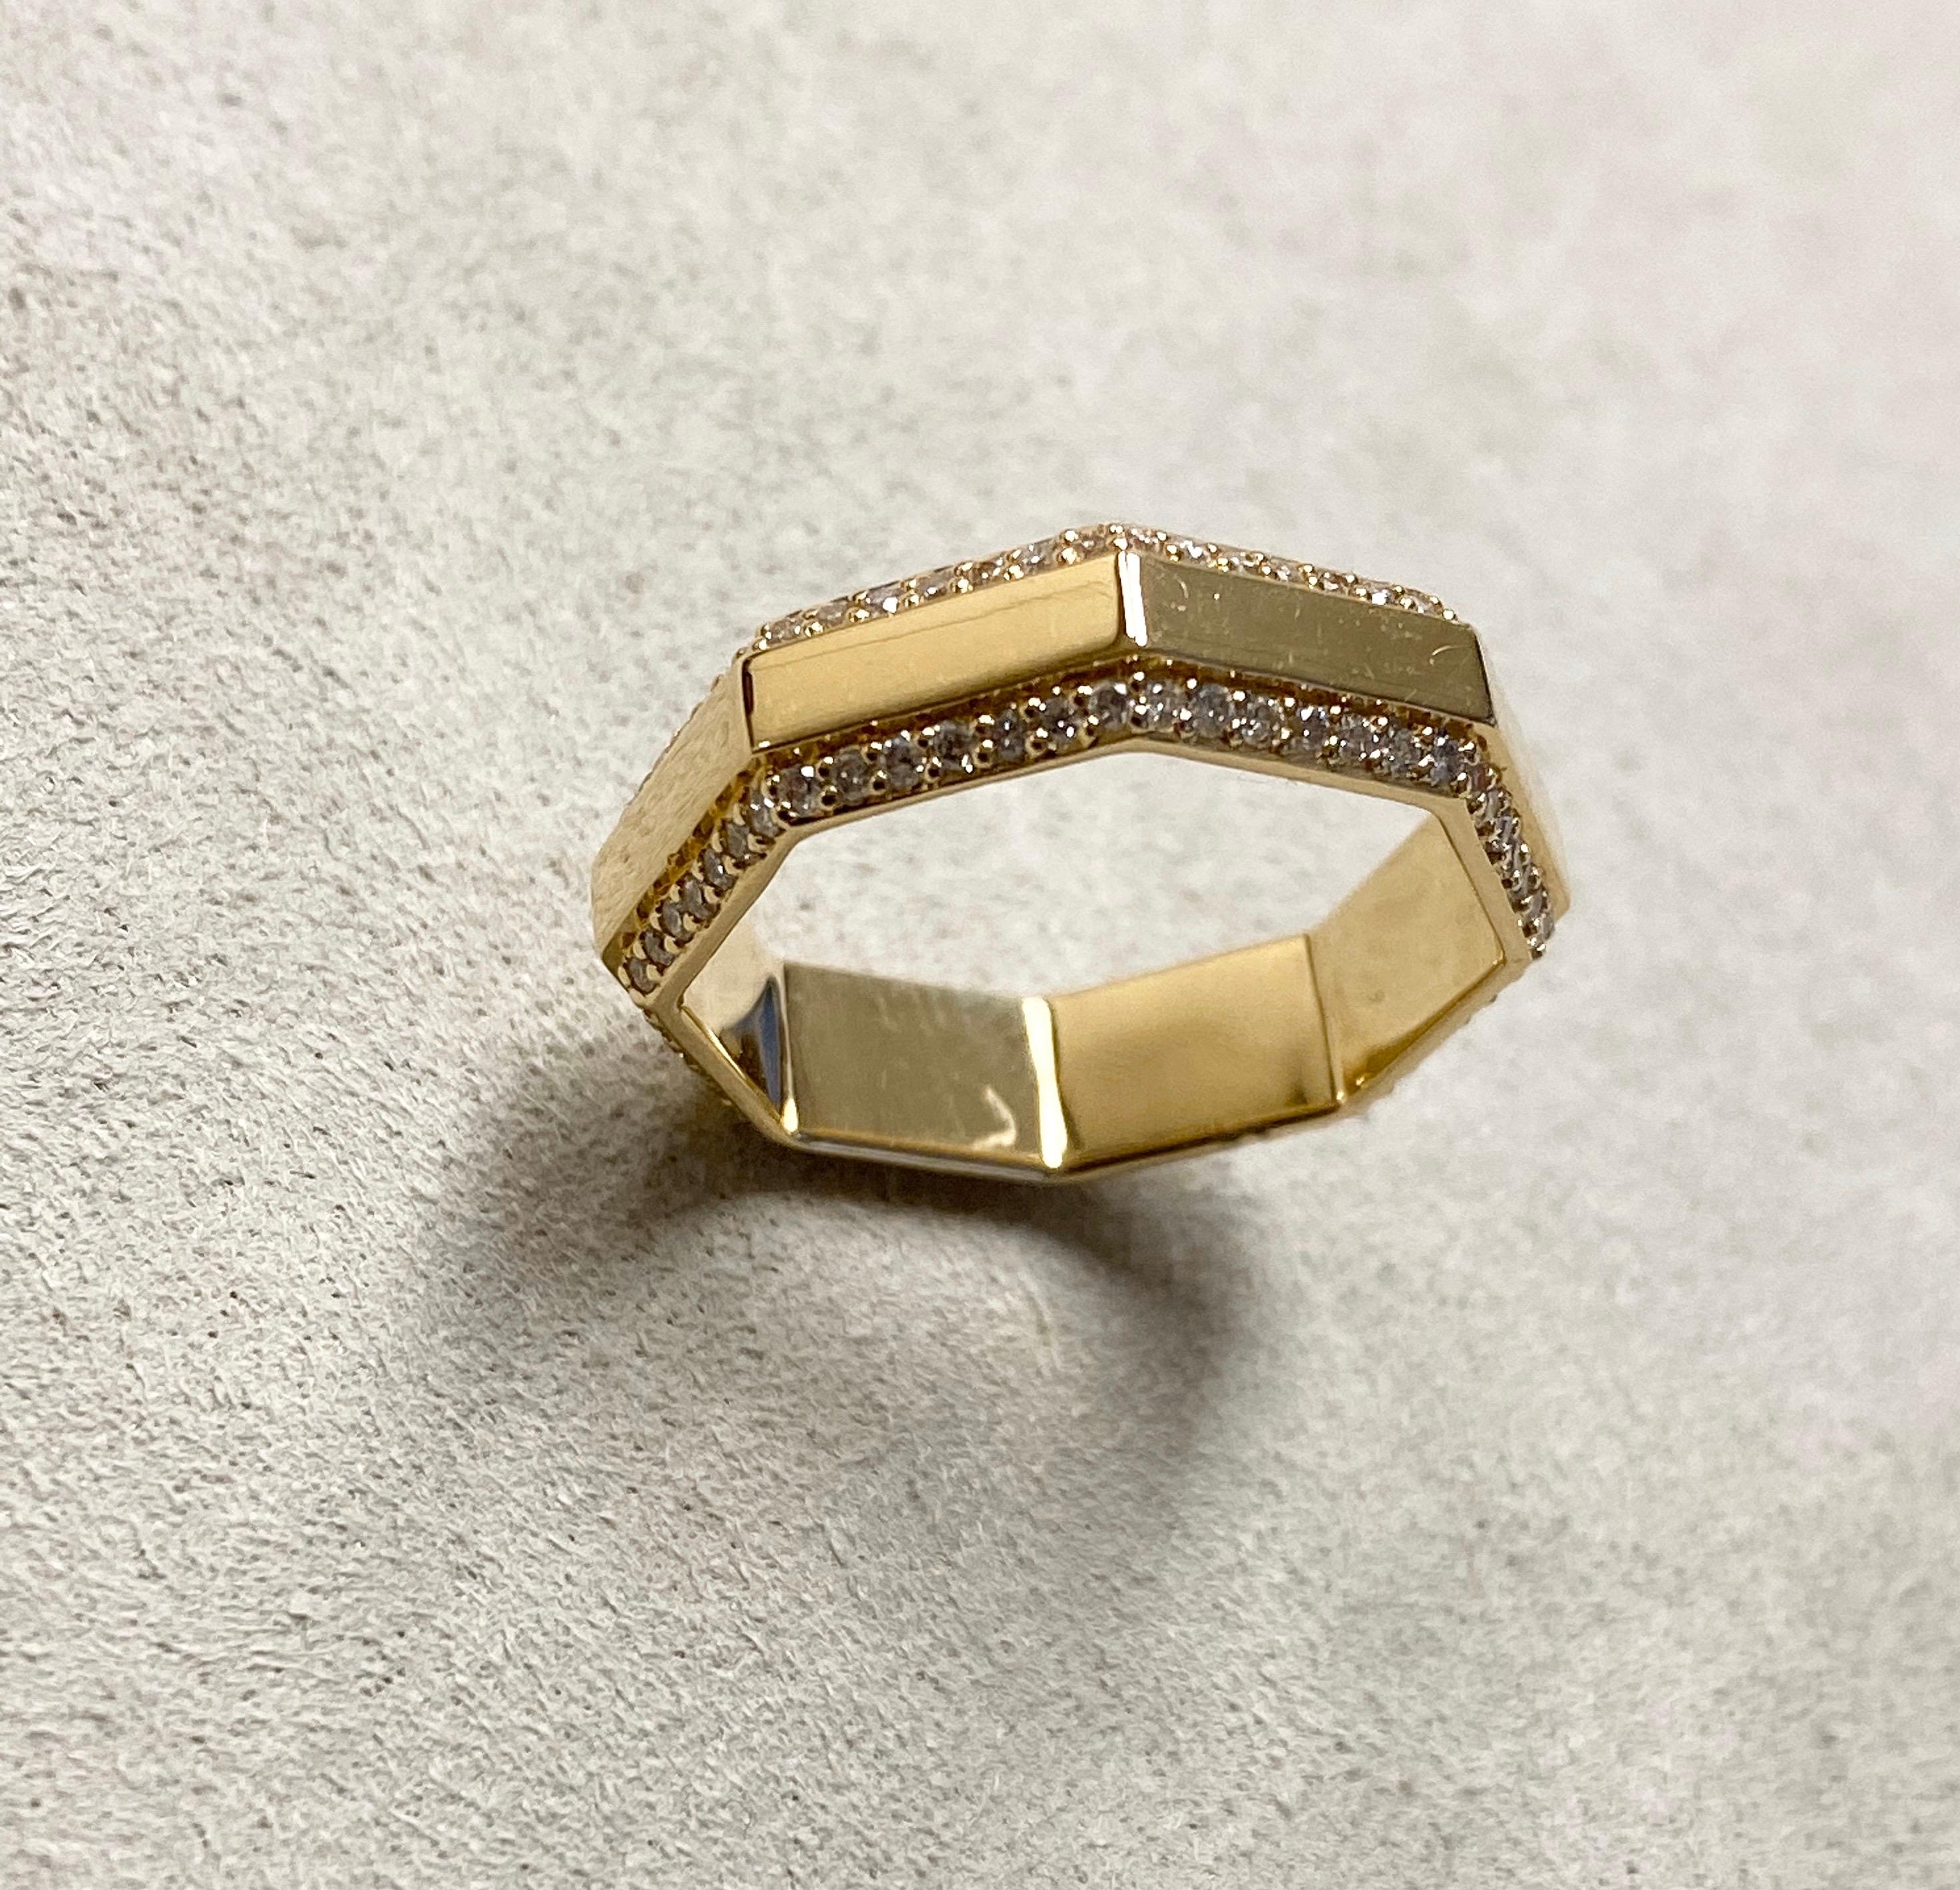 Created in 18 karat yellow gold
Diamonds 0.45 ct approx
Ring size US 6.5, Can be made in other ring sizes on special order

Crafted in resplendent 18 karat yellow gold, this remarkable ring is adorned with 0.45 carats of glittering diamonds. It is